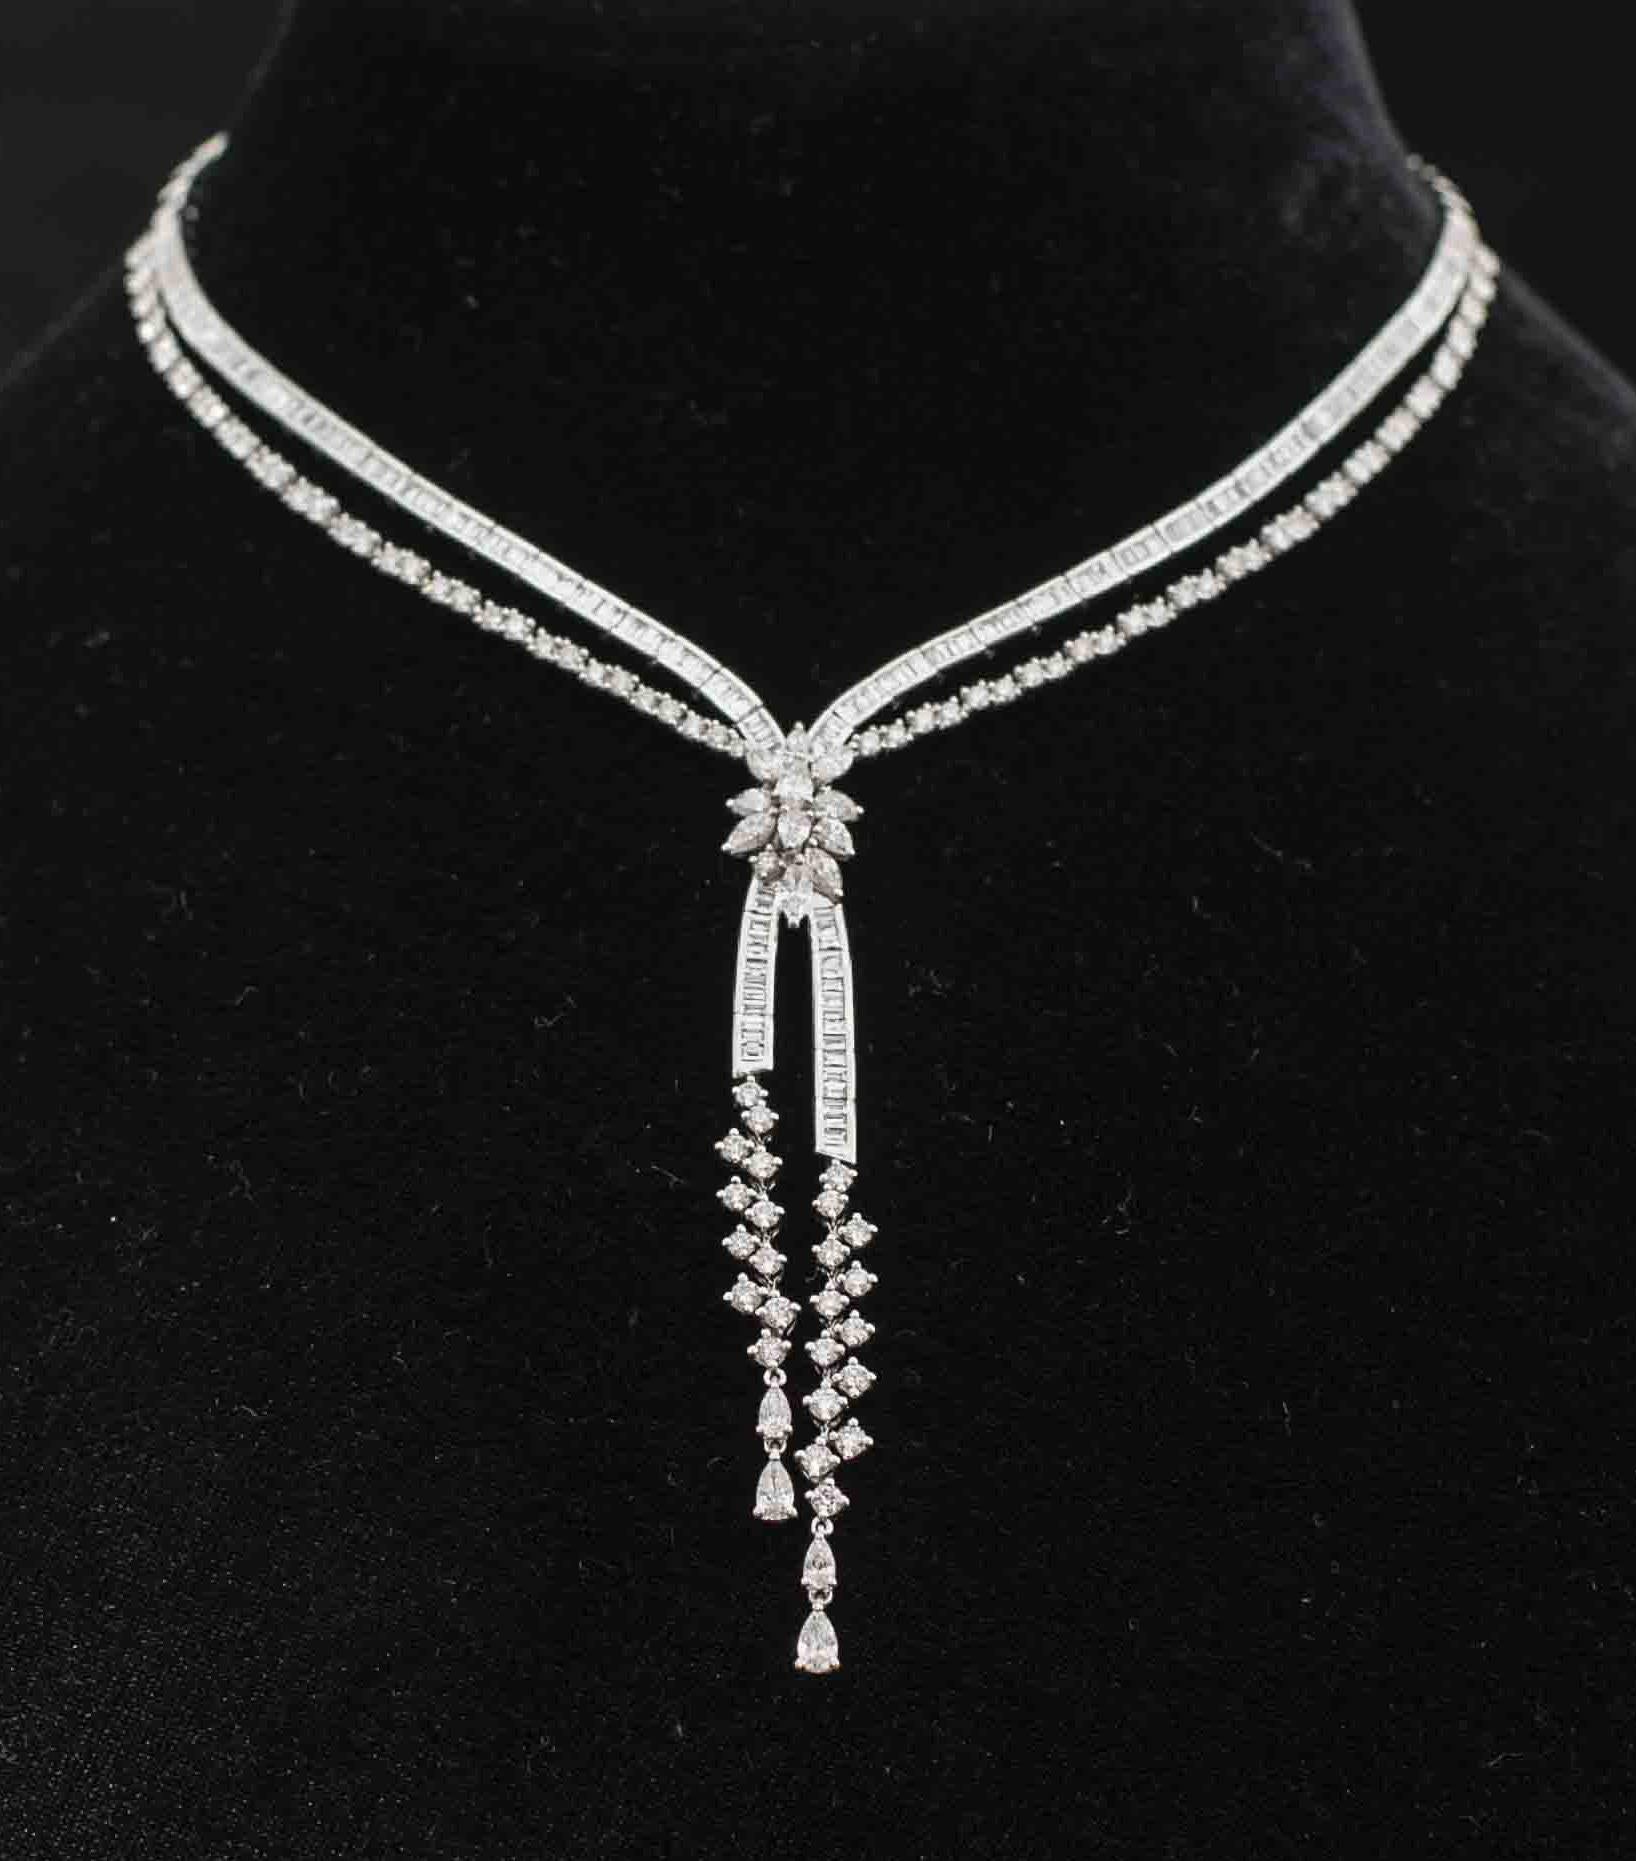 Glamourous  18 Karat White Gold and Diamond Necklace.

Diamonds of approximately 11.531 carats, mounted on 18 karat white gold choker necklace. The Necklace weighs approximately 58 grams.

Please note: The charges specified do not include any